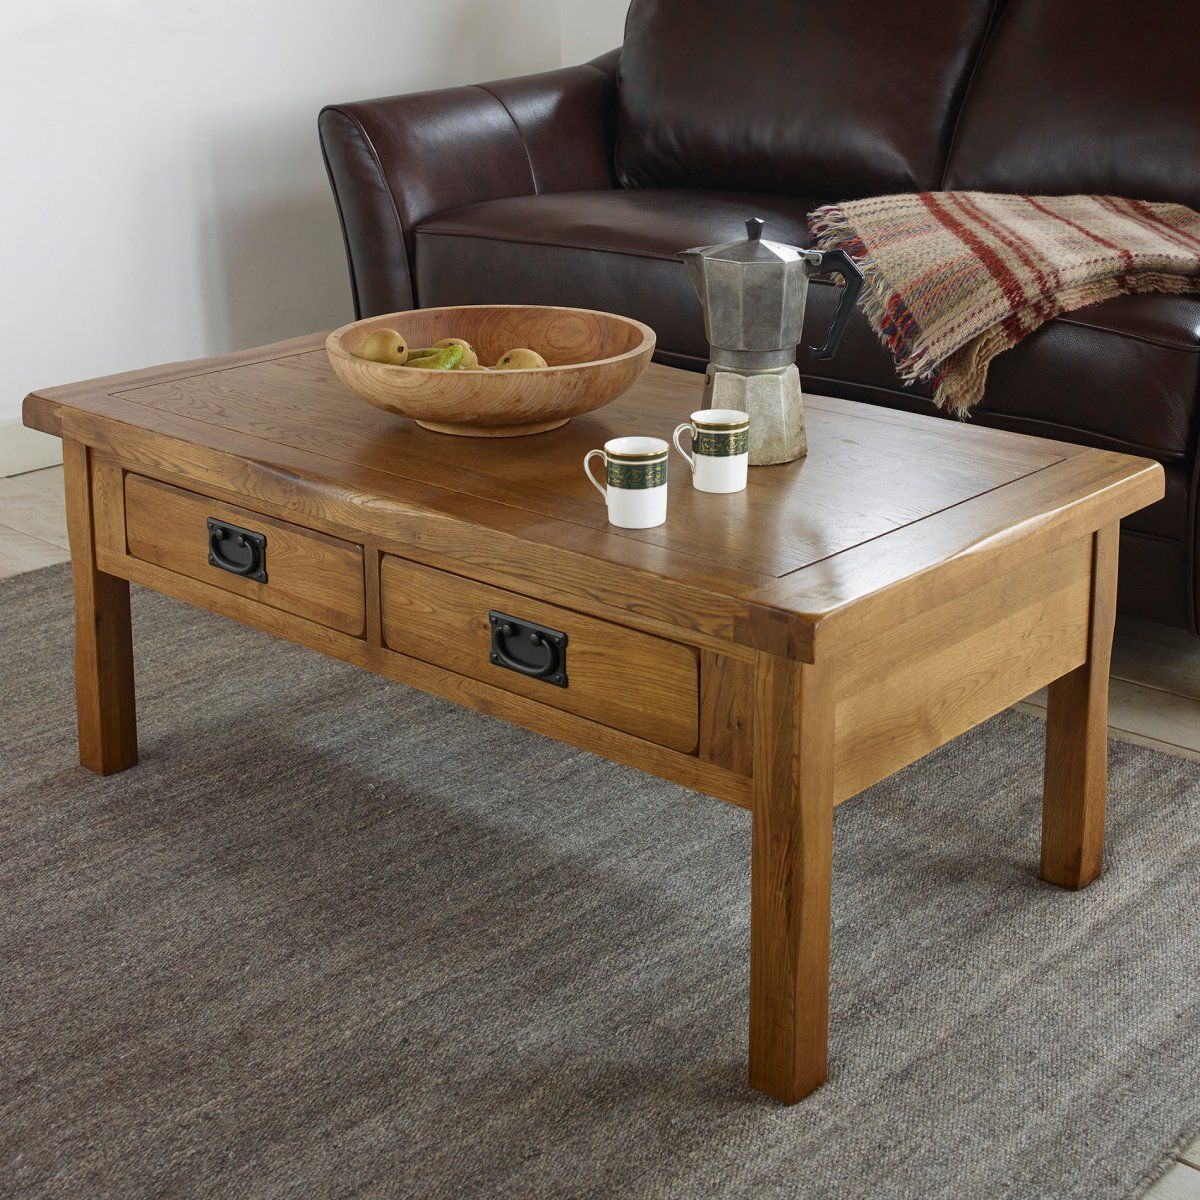 Original Rustic 4 Drawer Coffee Table In Solid Oak Intended For Popular Rustic Wood Coffee Tables (Photo 10 of 15)